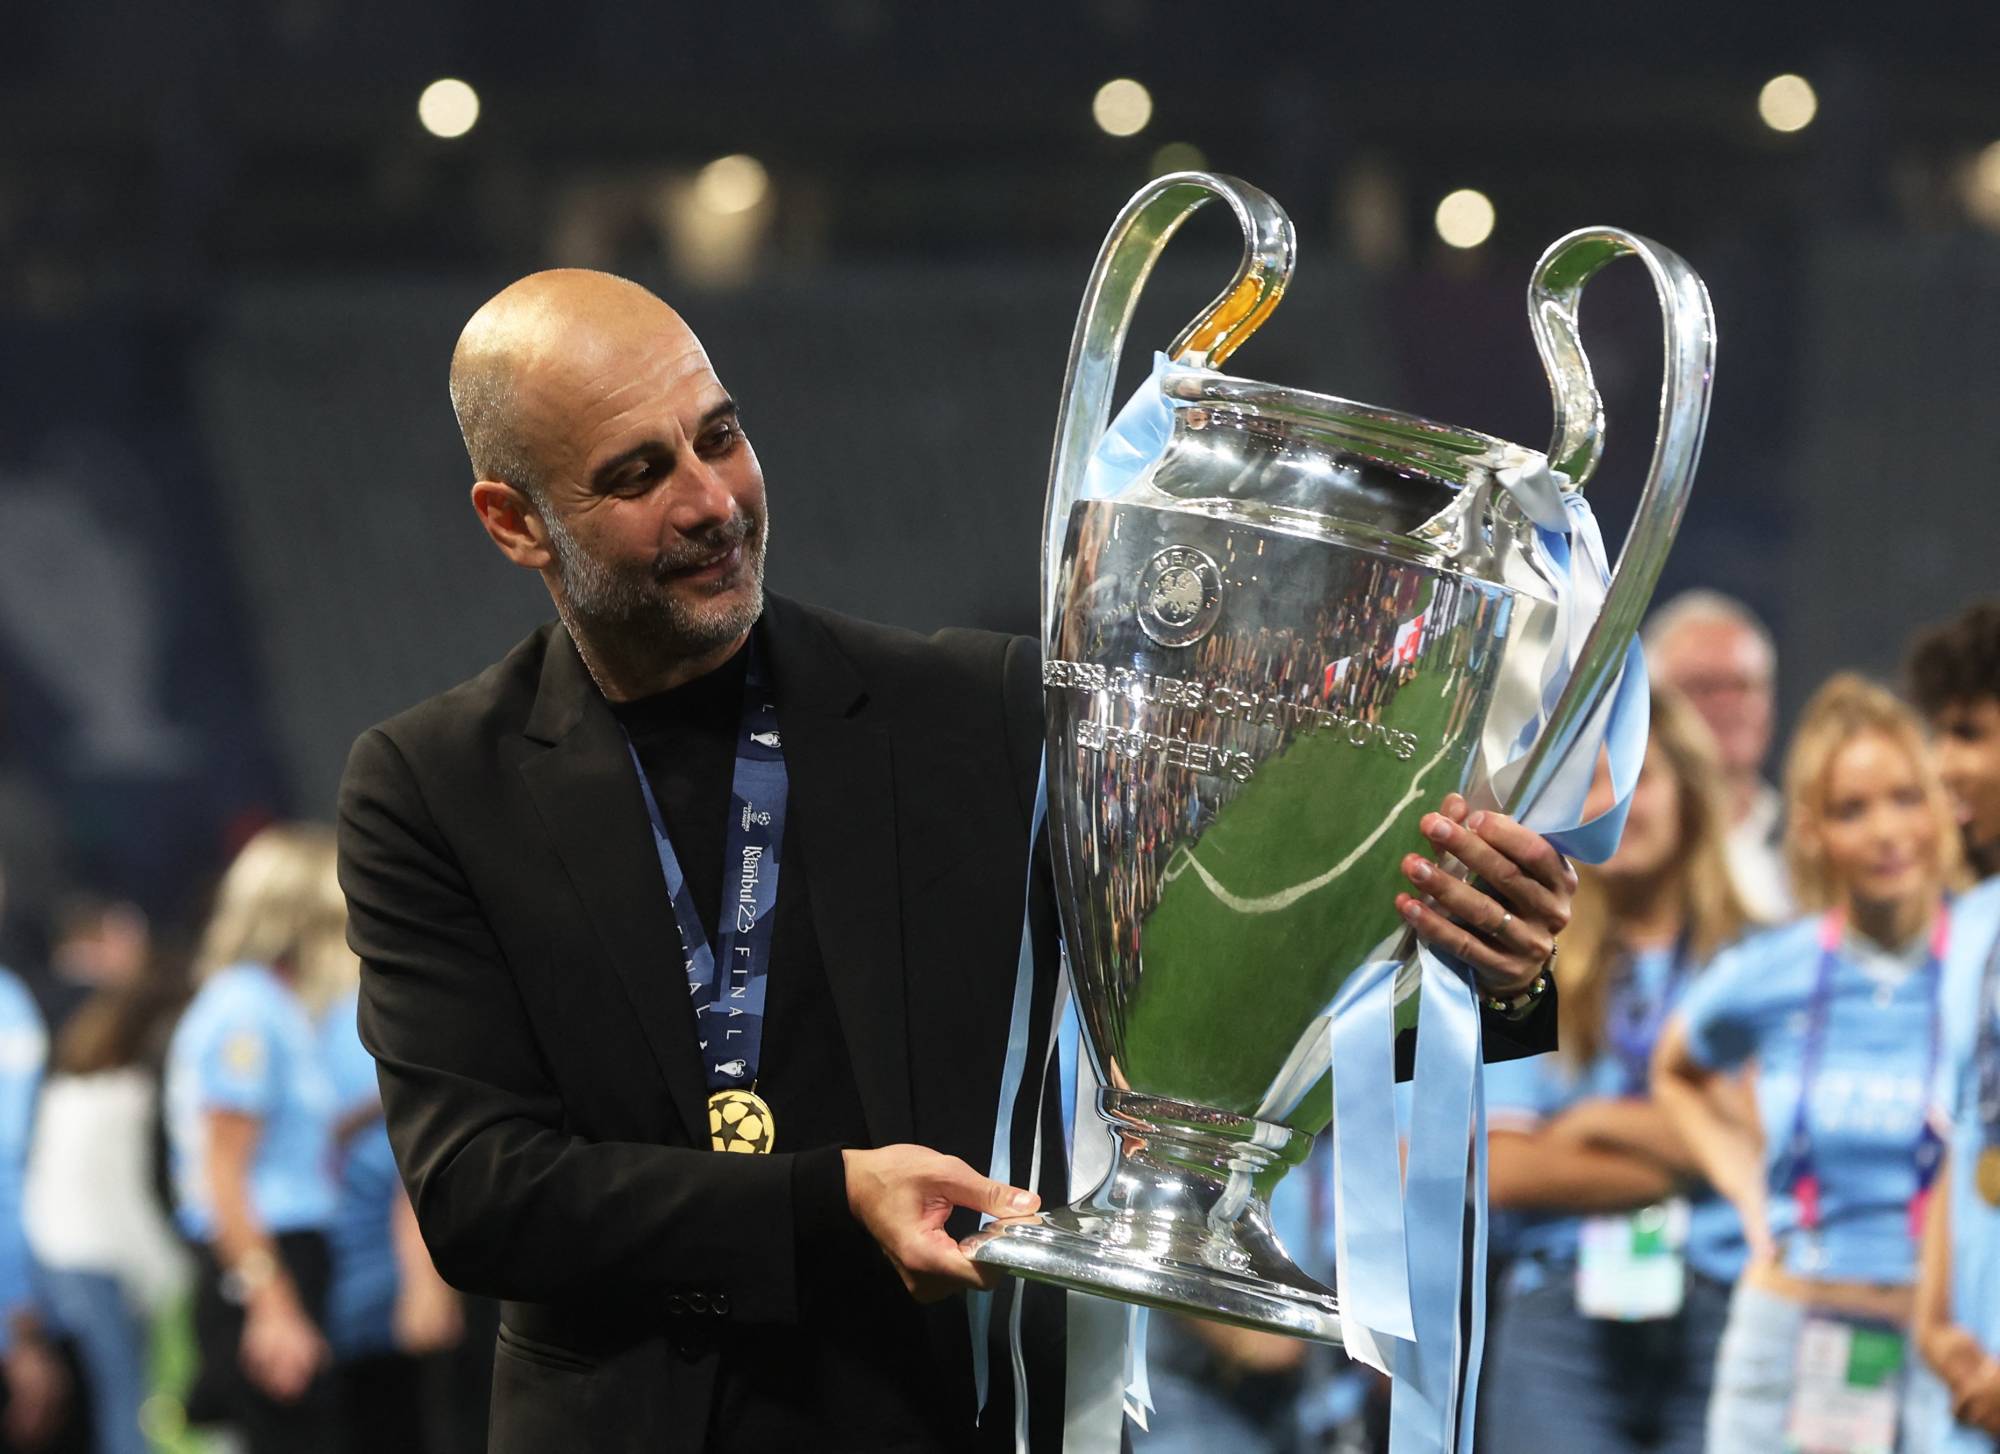 Manchester City is Europes champion, a title years and billions in the making